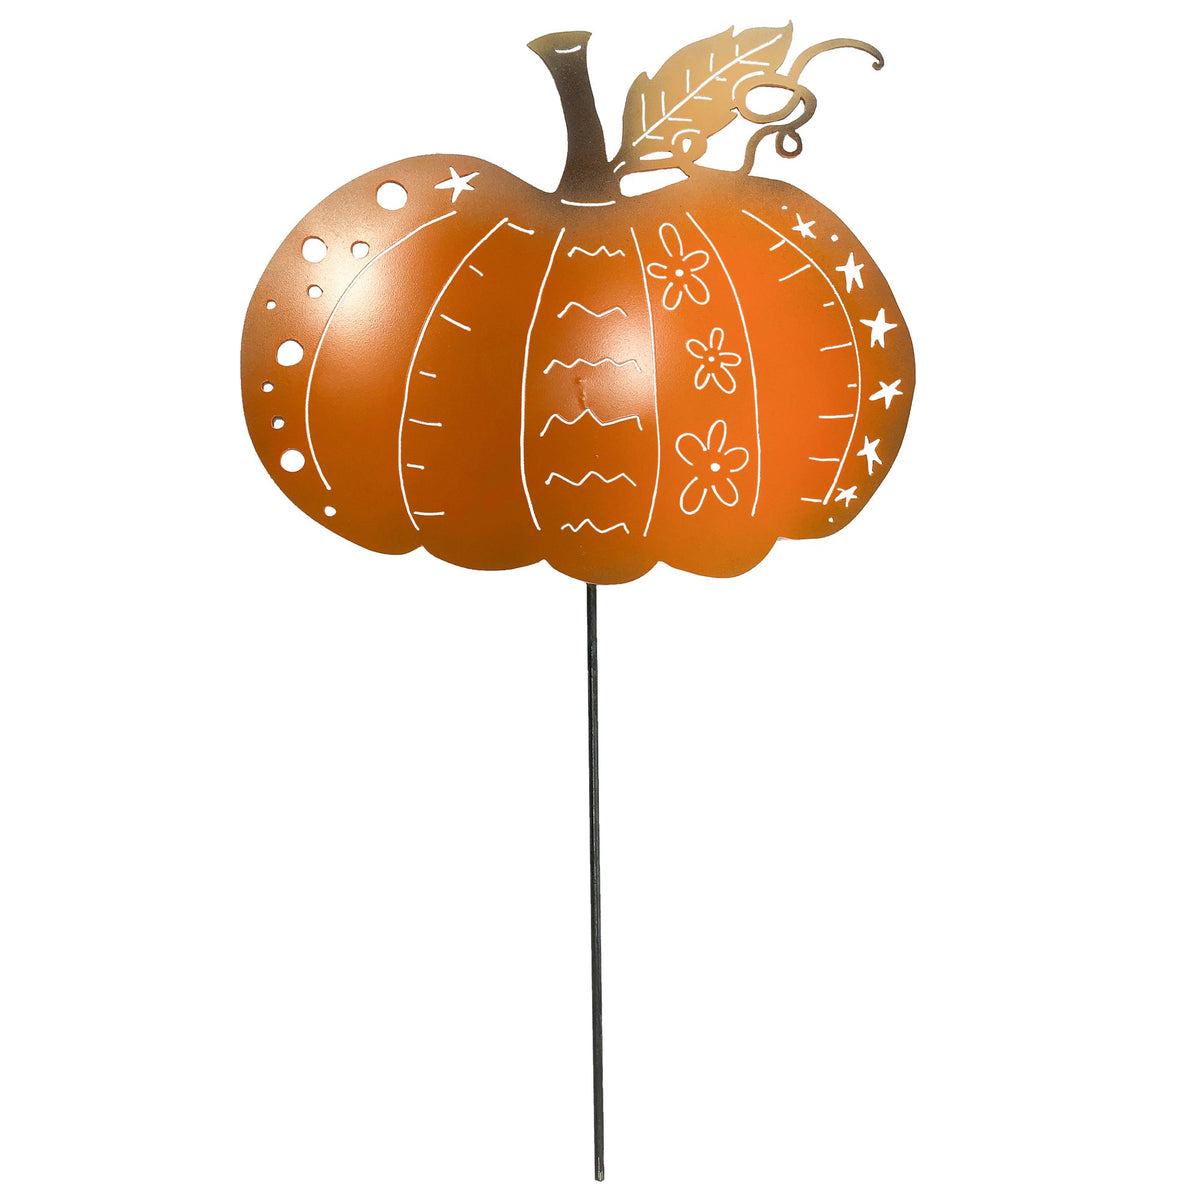 Metal Pumpkin Garden Stake Painted Orange and with funky cut outs